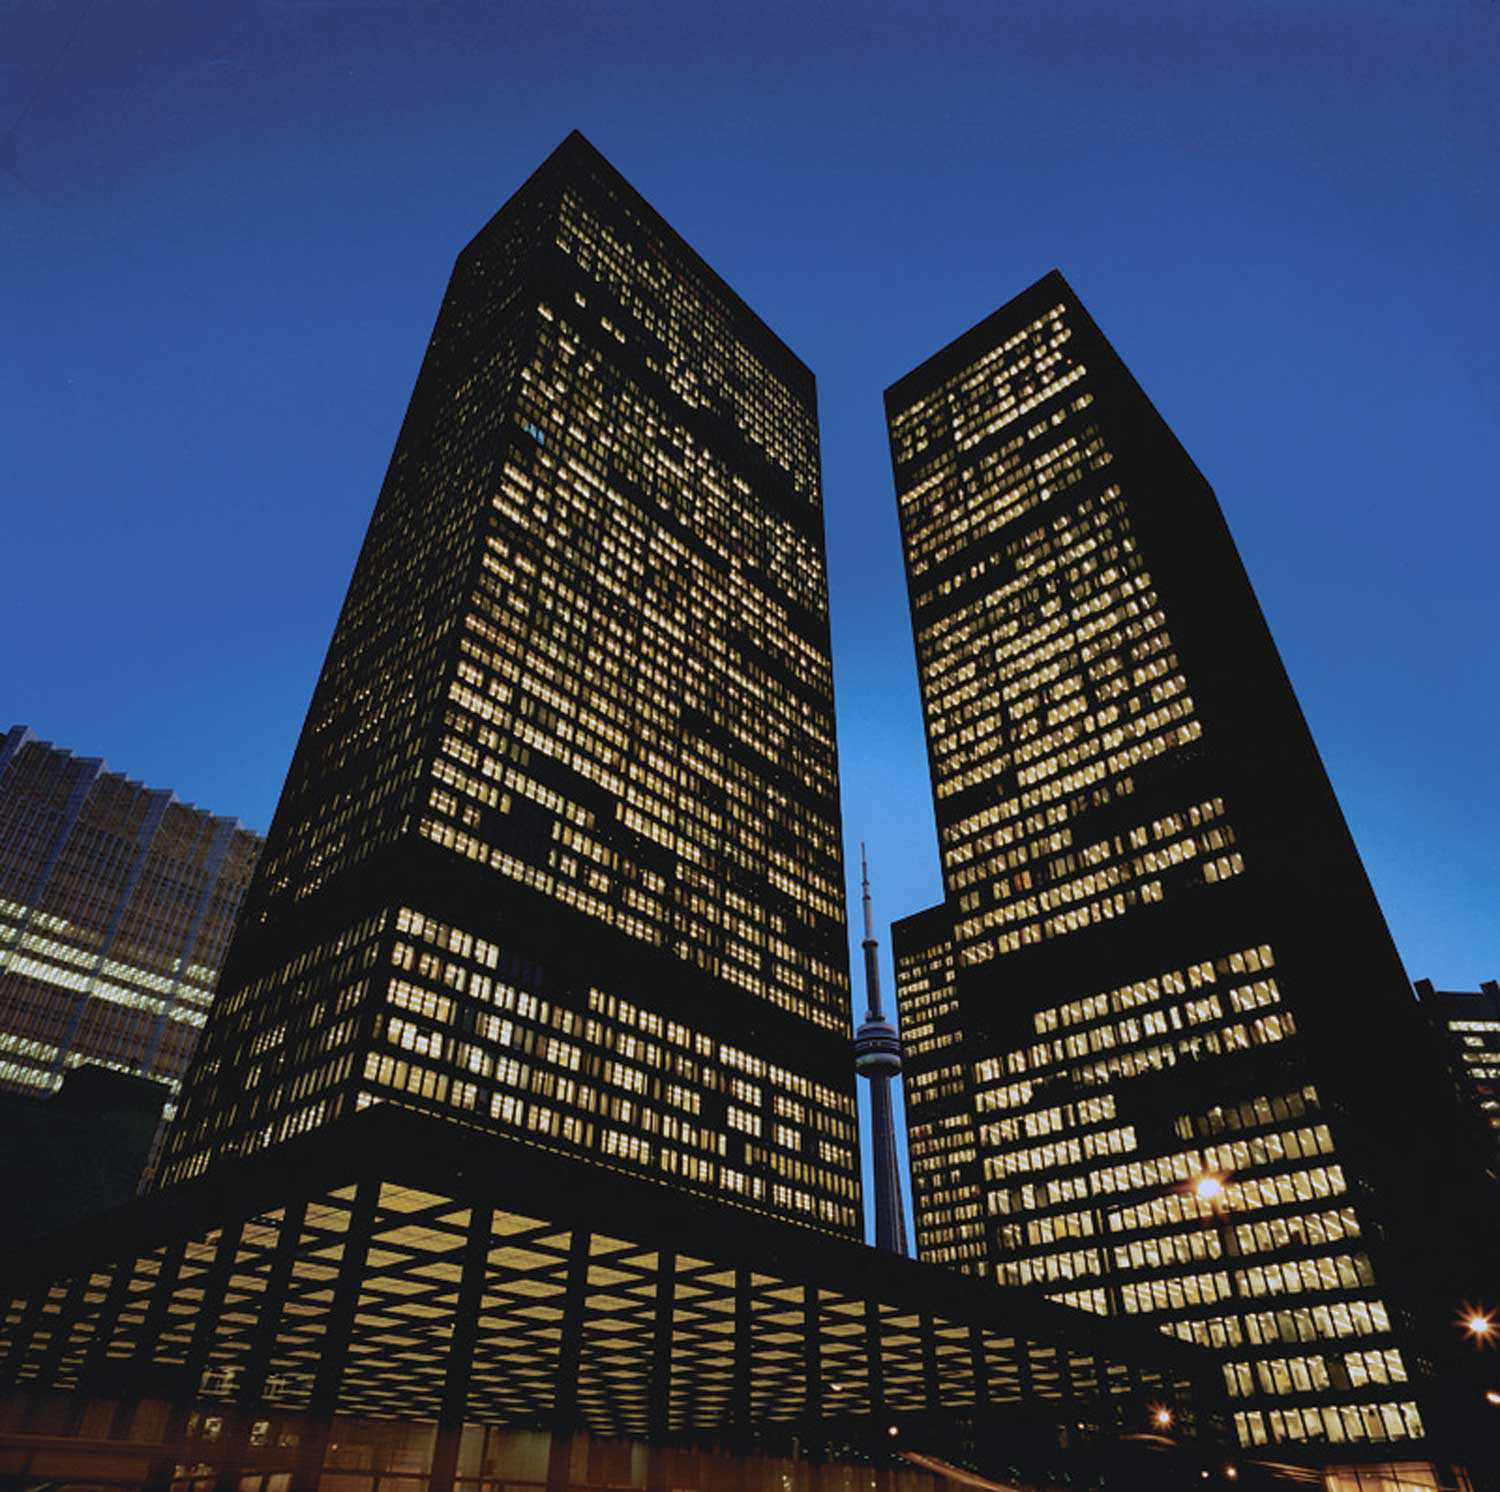 Maintaining balance: The modern architecture of the Toronto-Dominion Centre is part of Ontario’s varied architectural heritage. (Copyright permission provided by The Cadillac Fairview Corporation Ltd.)